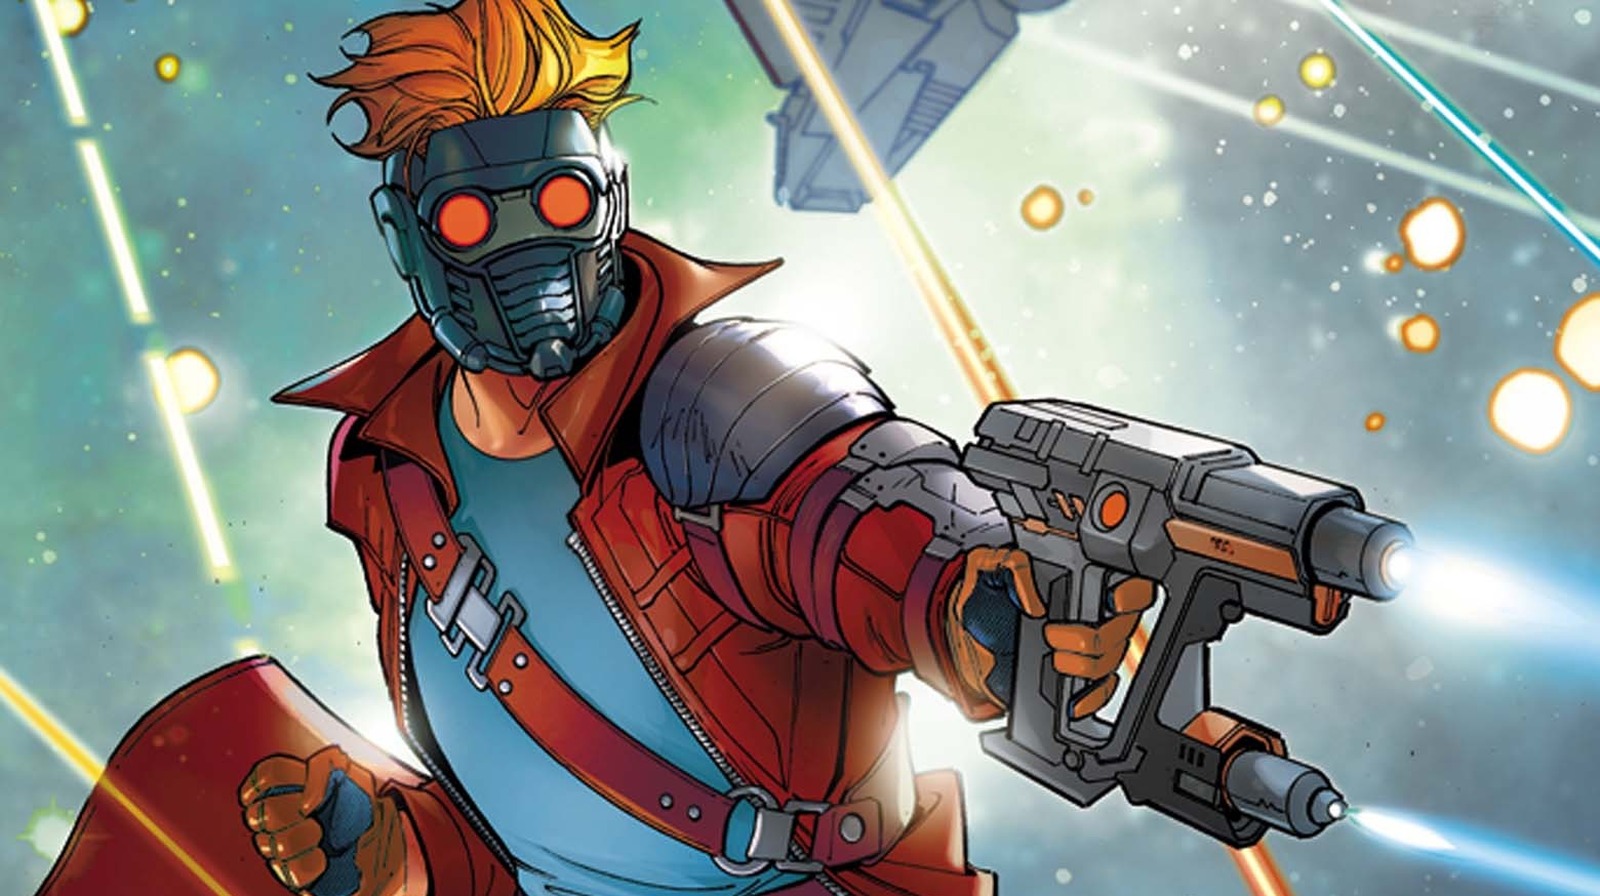 Star-Lord is having a 'Legendary' summer